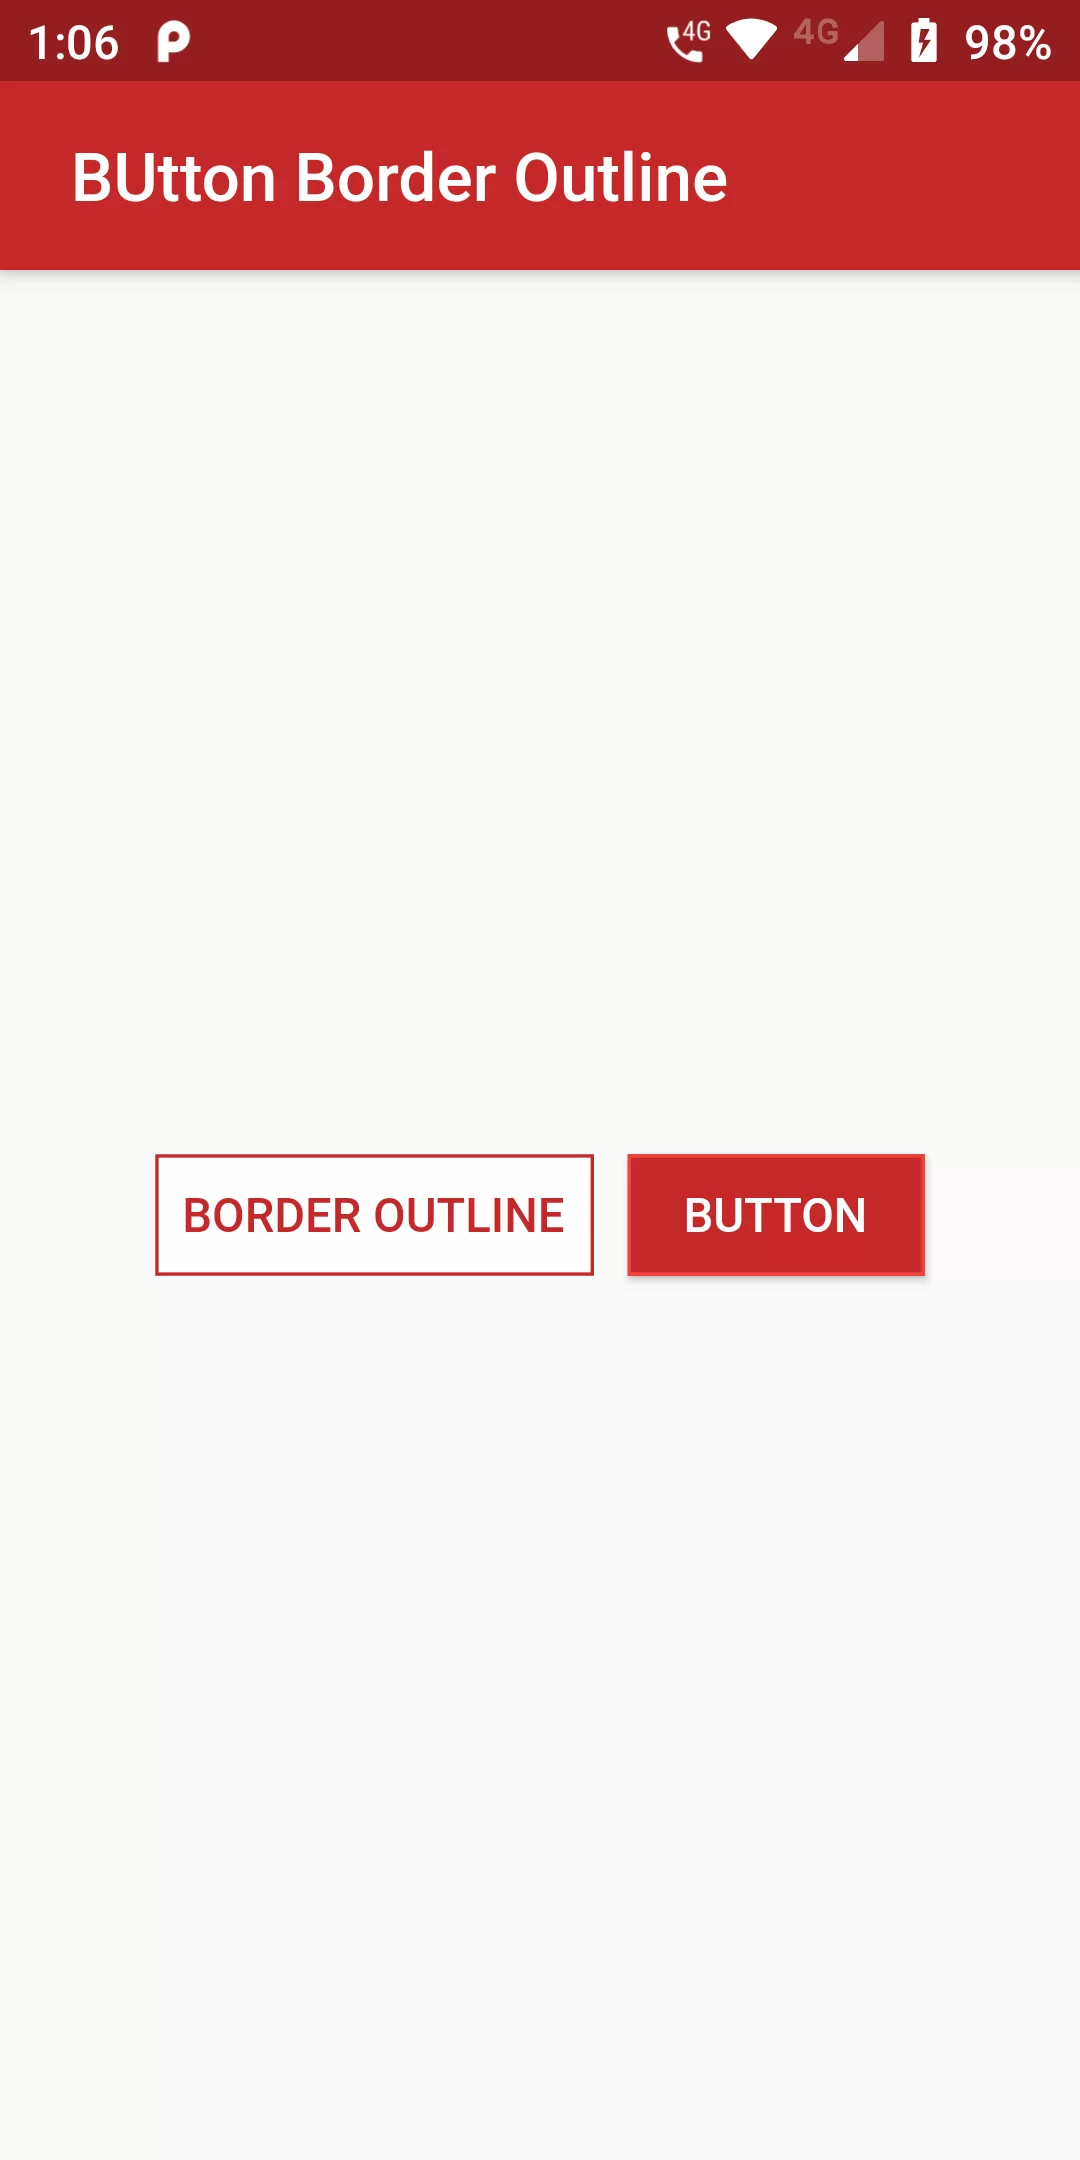 How To Create Button Border Outline Using Flutter Android App